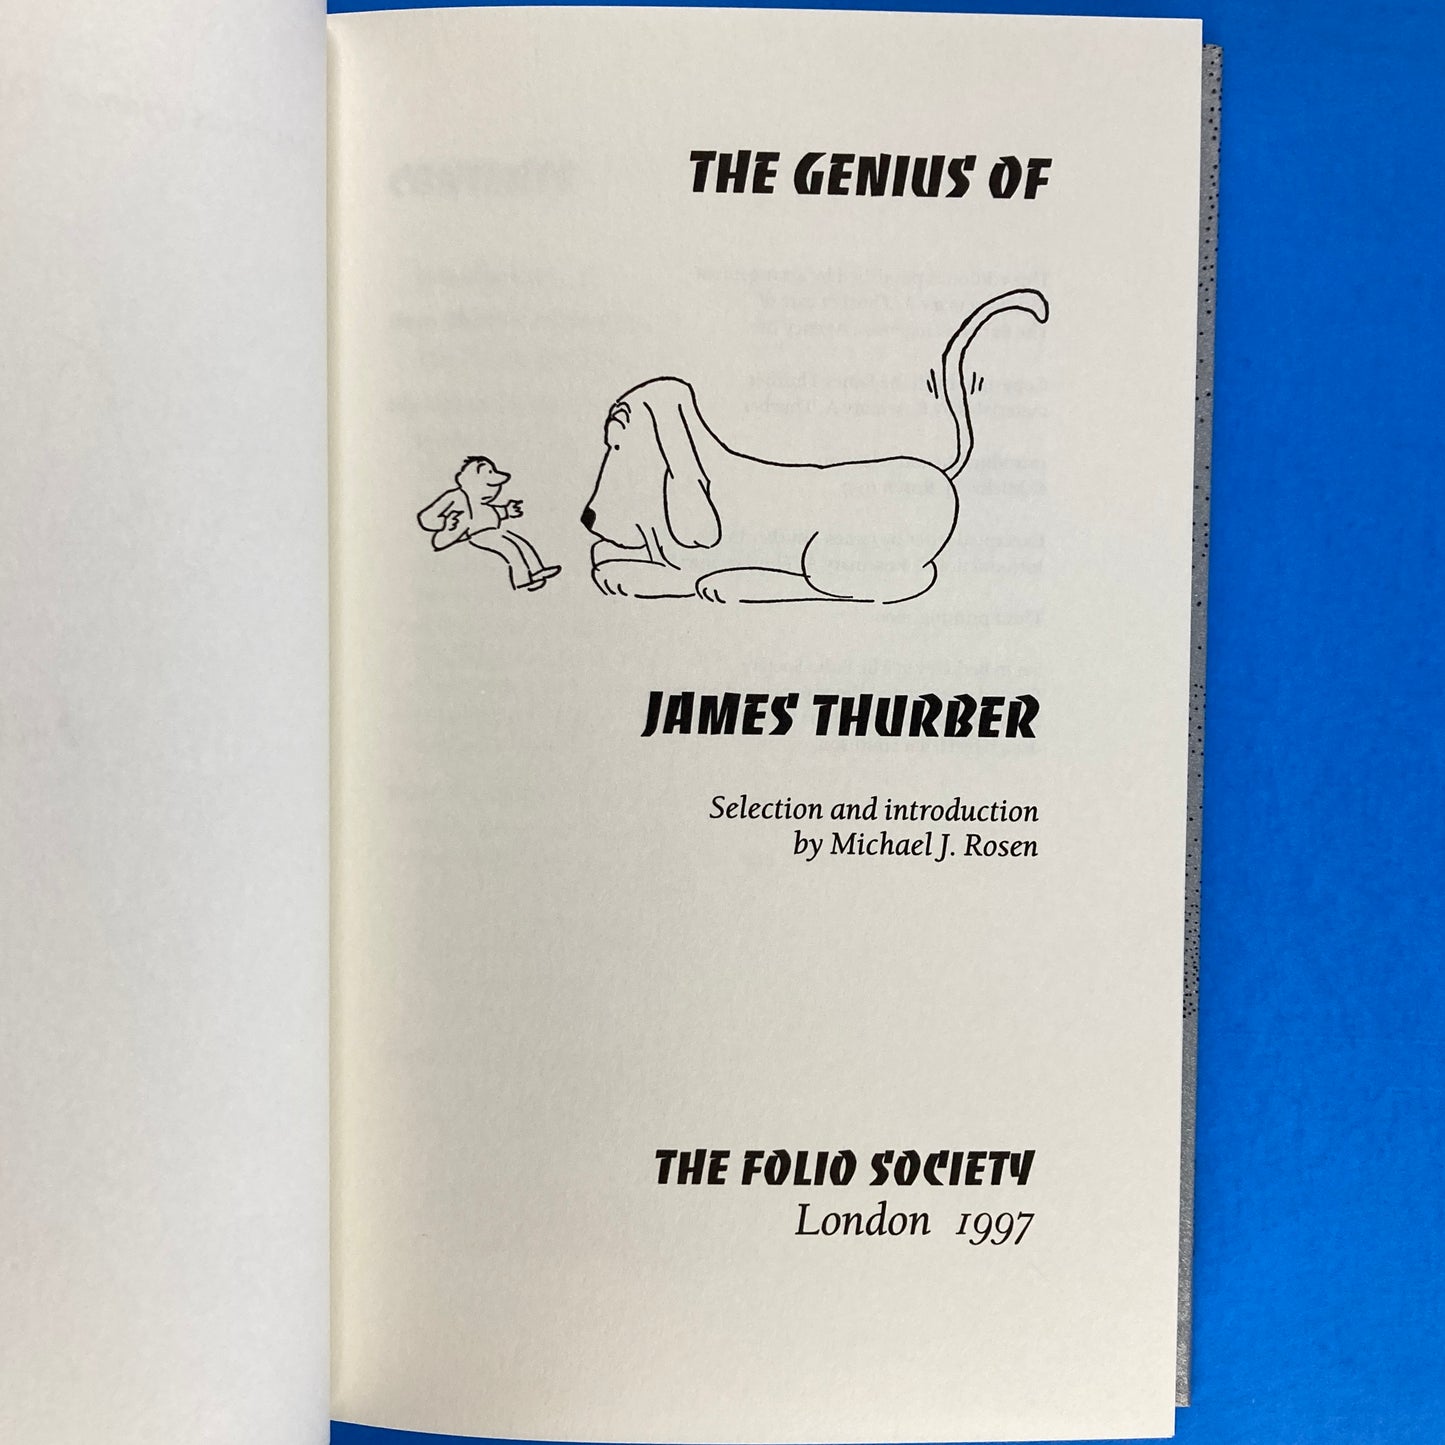 The Genius of James Thurber